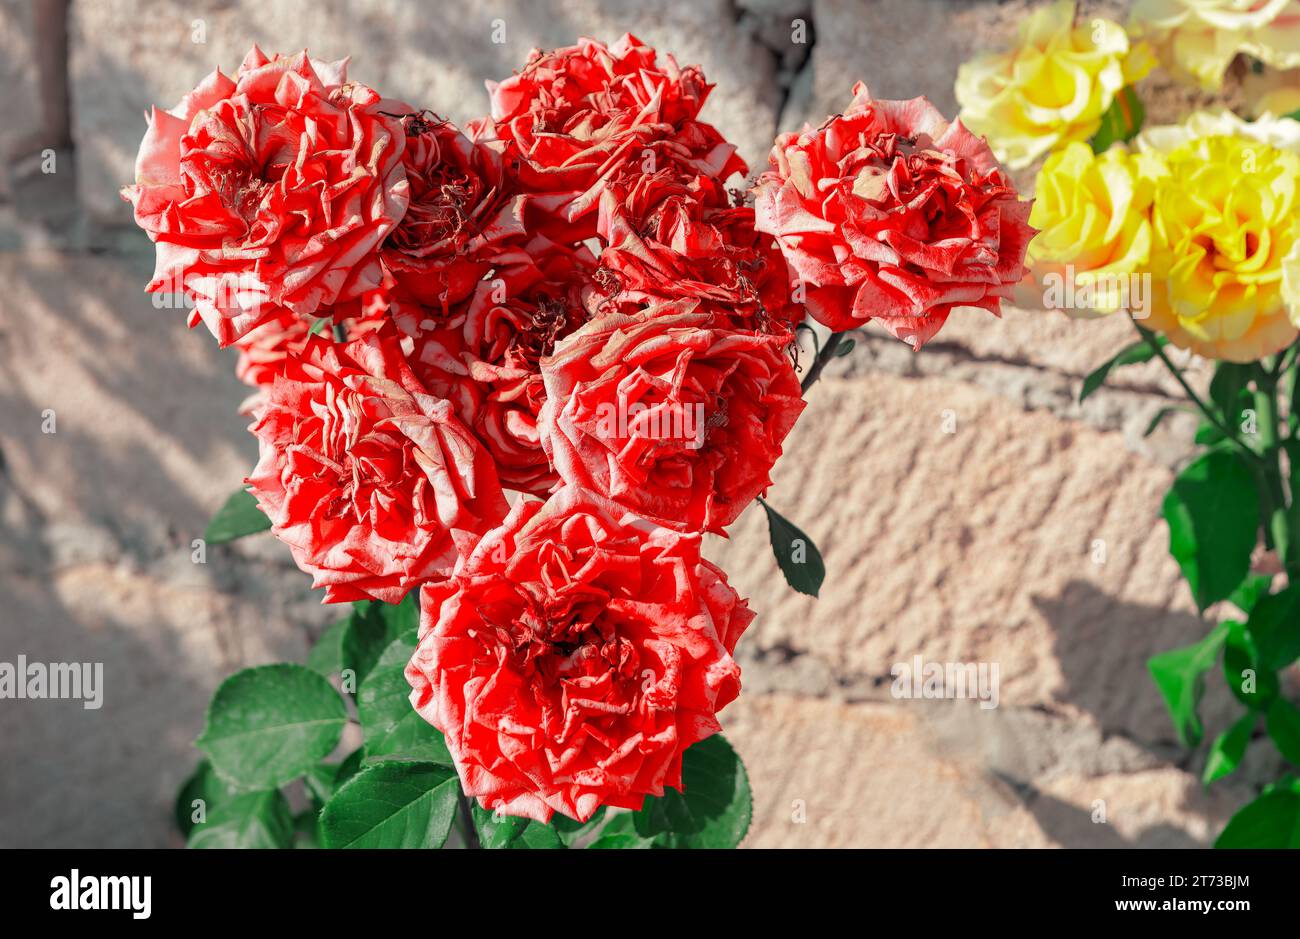 Cluster of red roses graces the garden with vibrant fading petals Stock Photo